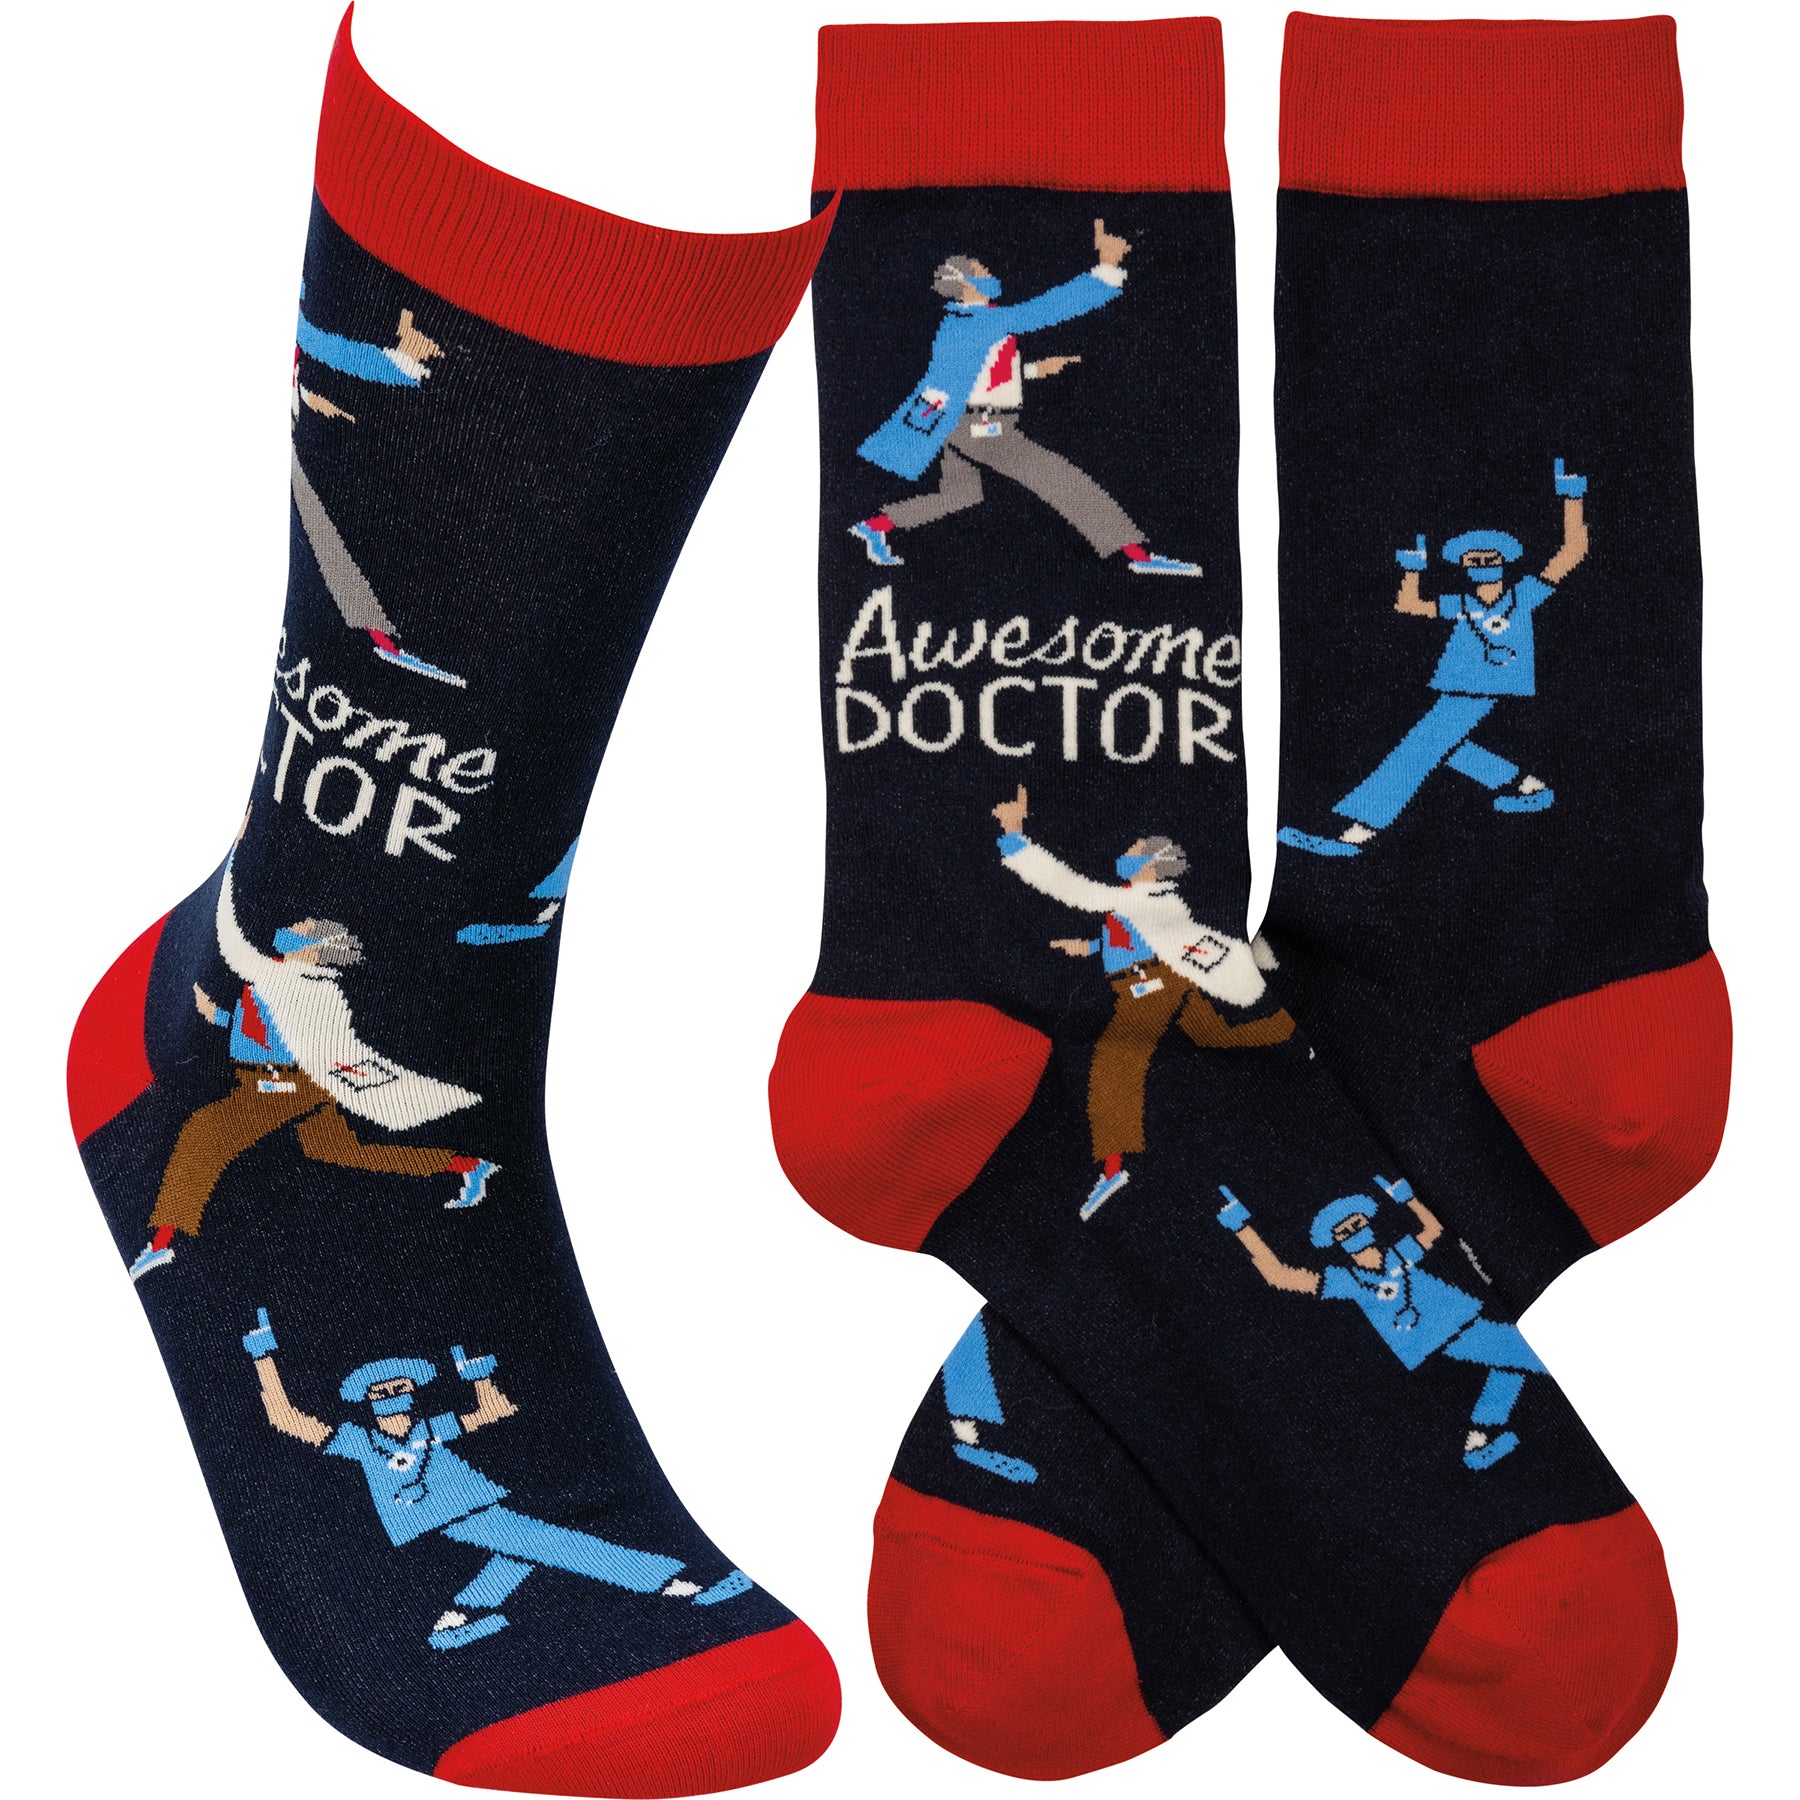 Awesome Doctor Socks